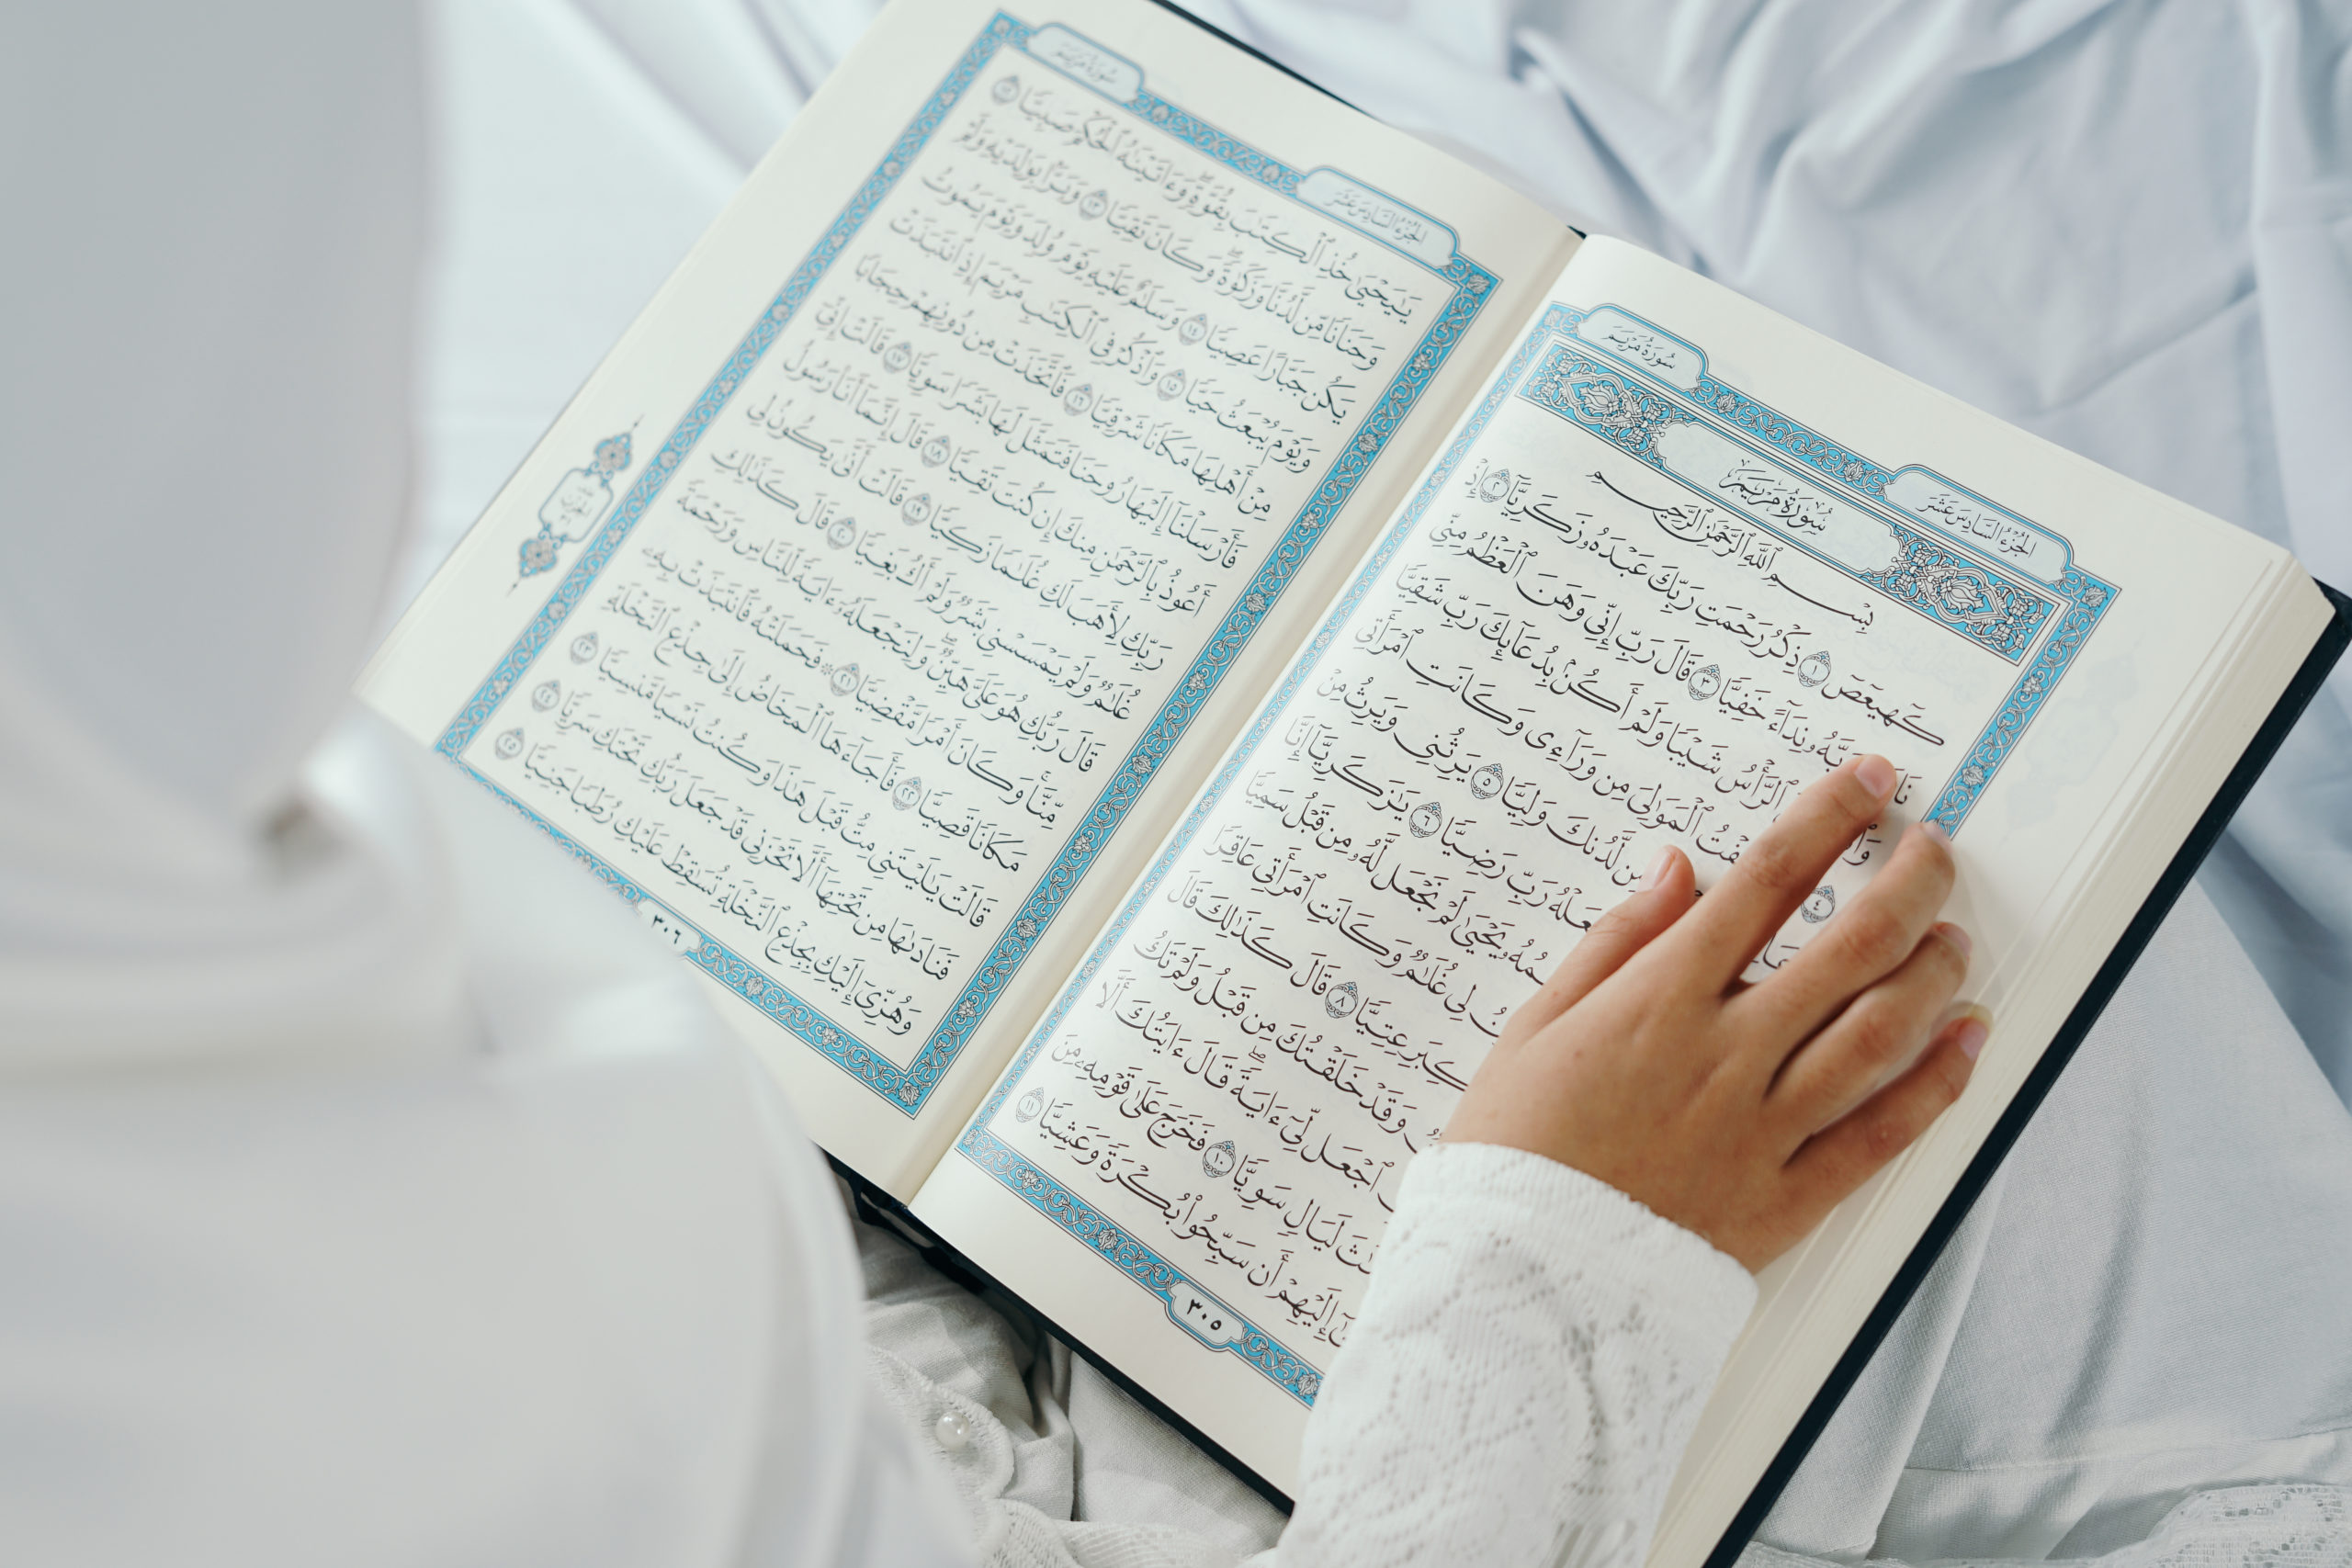 How to learn the Arabic language to understand the Quran